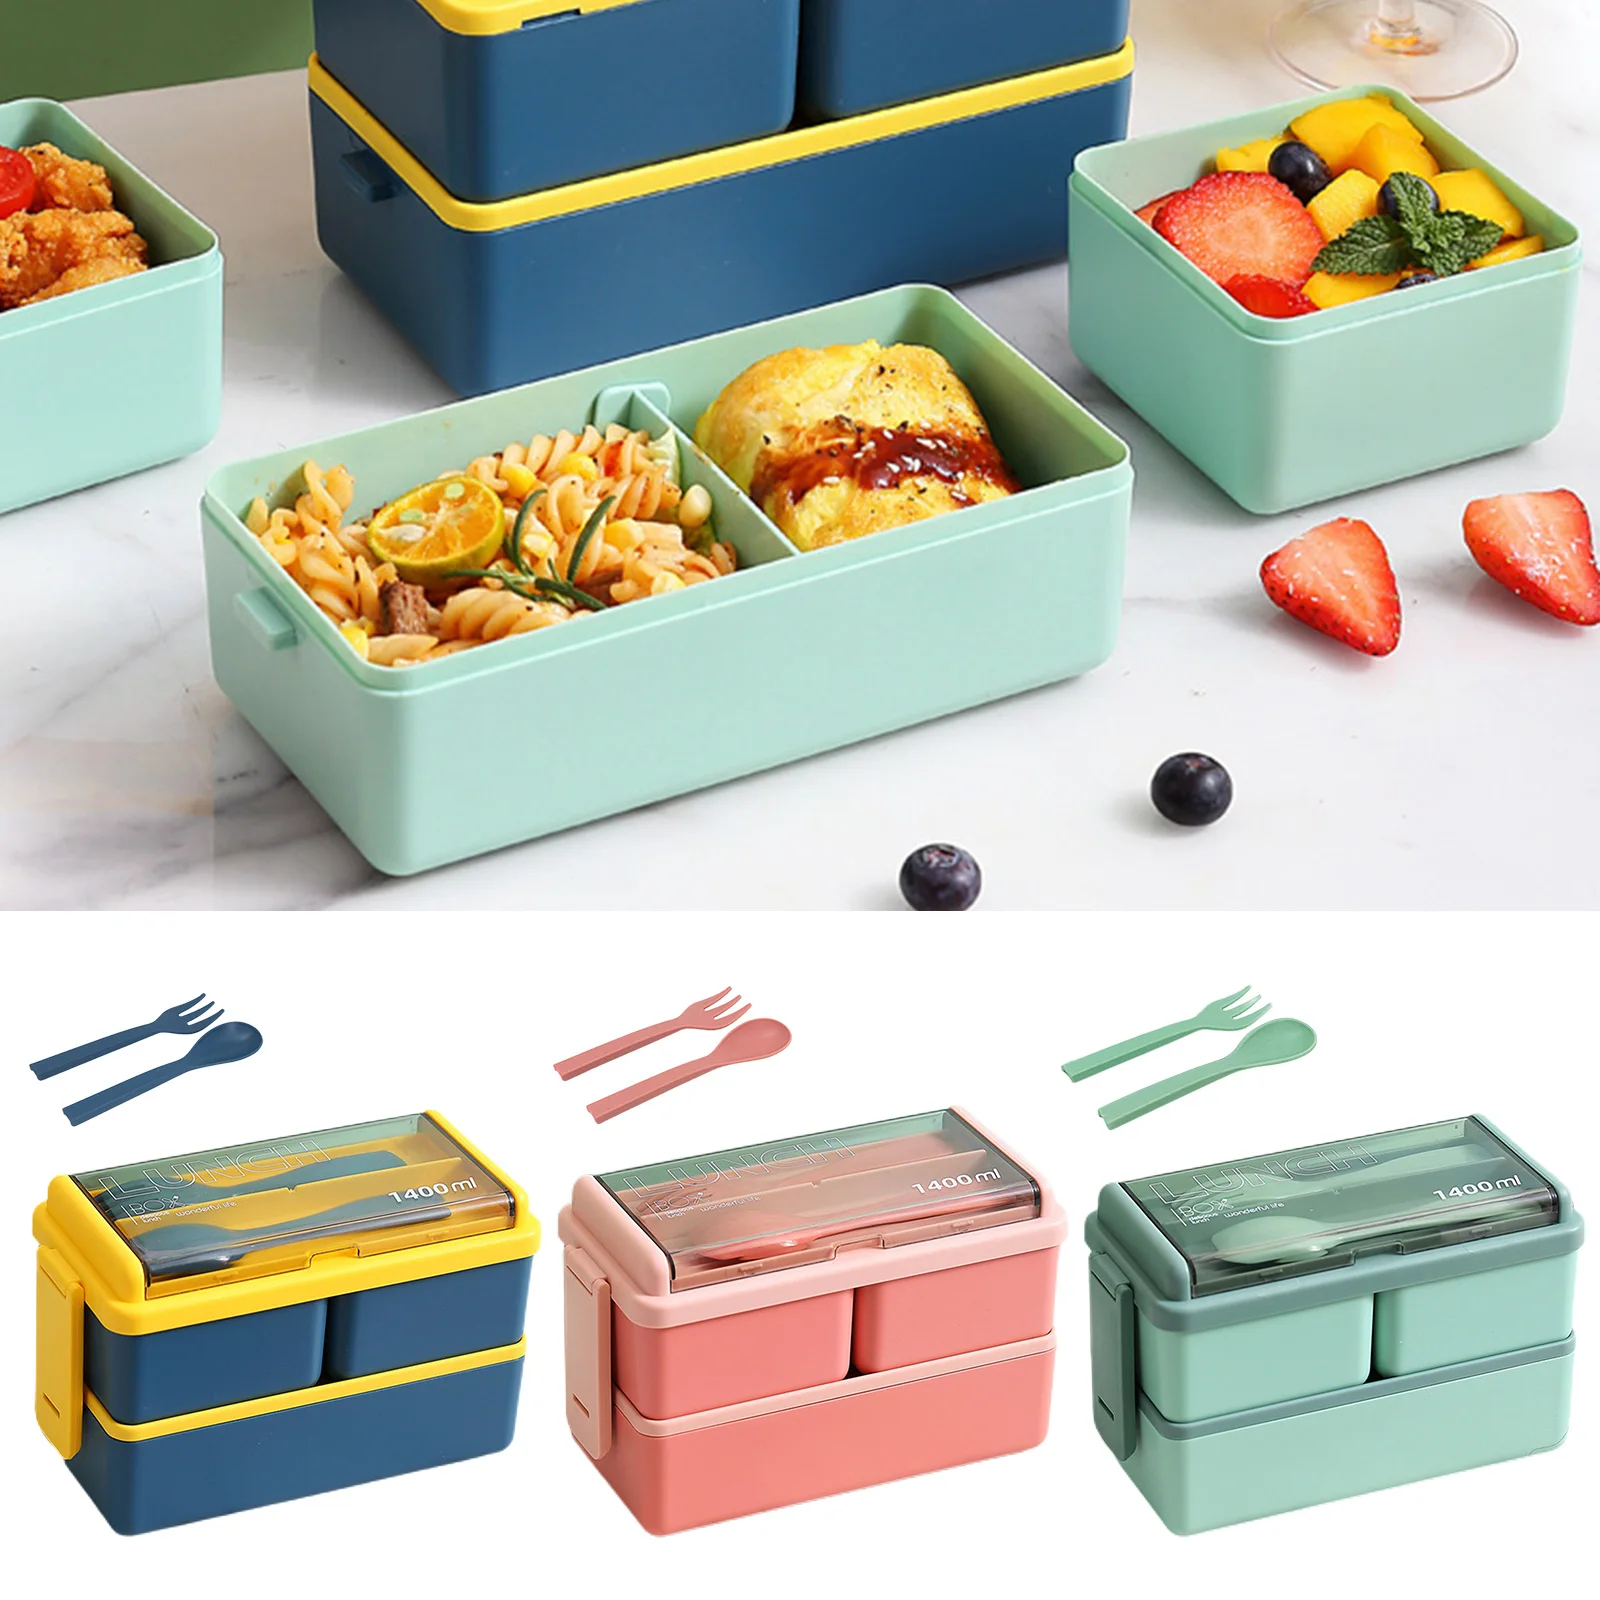 2-tier Men Bento Lunch Box Set With Chopsticks and Removable Divide